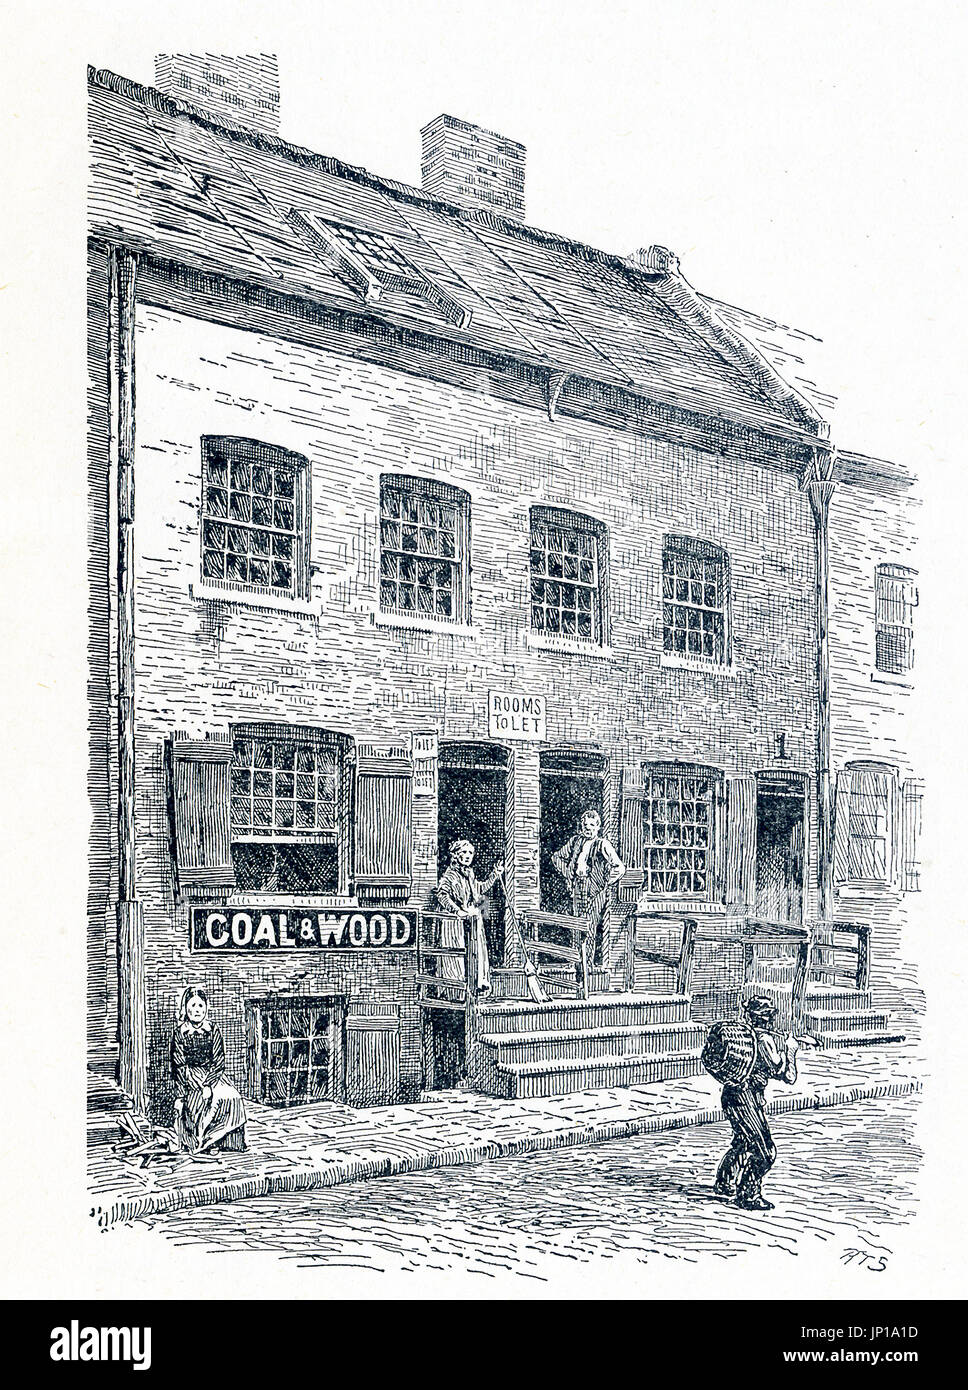 A tenement house on Hamilton Street in New York City that was known as 'The Ship' - a narrow entrance to the rear leading to the garret rooms. Nearby was the Water Street Mission. This illustration dates to 1899. Stock Photo